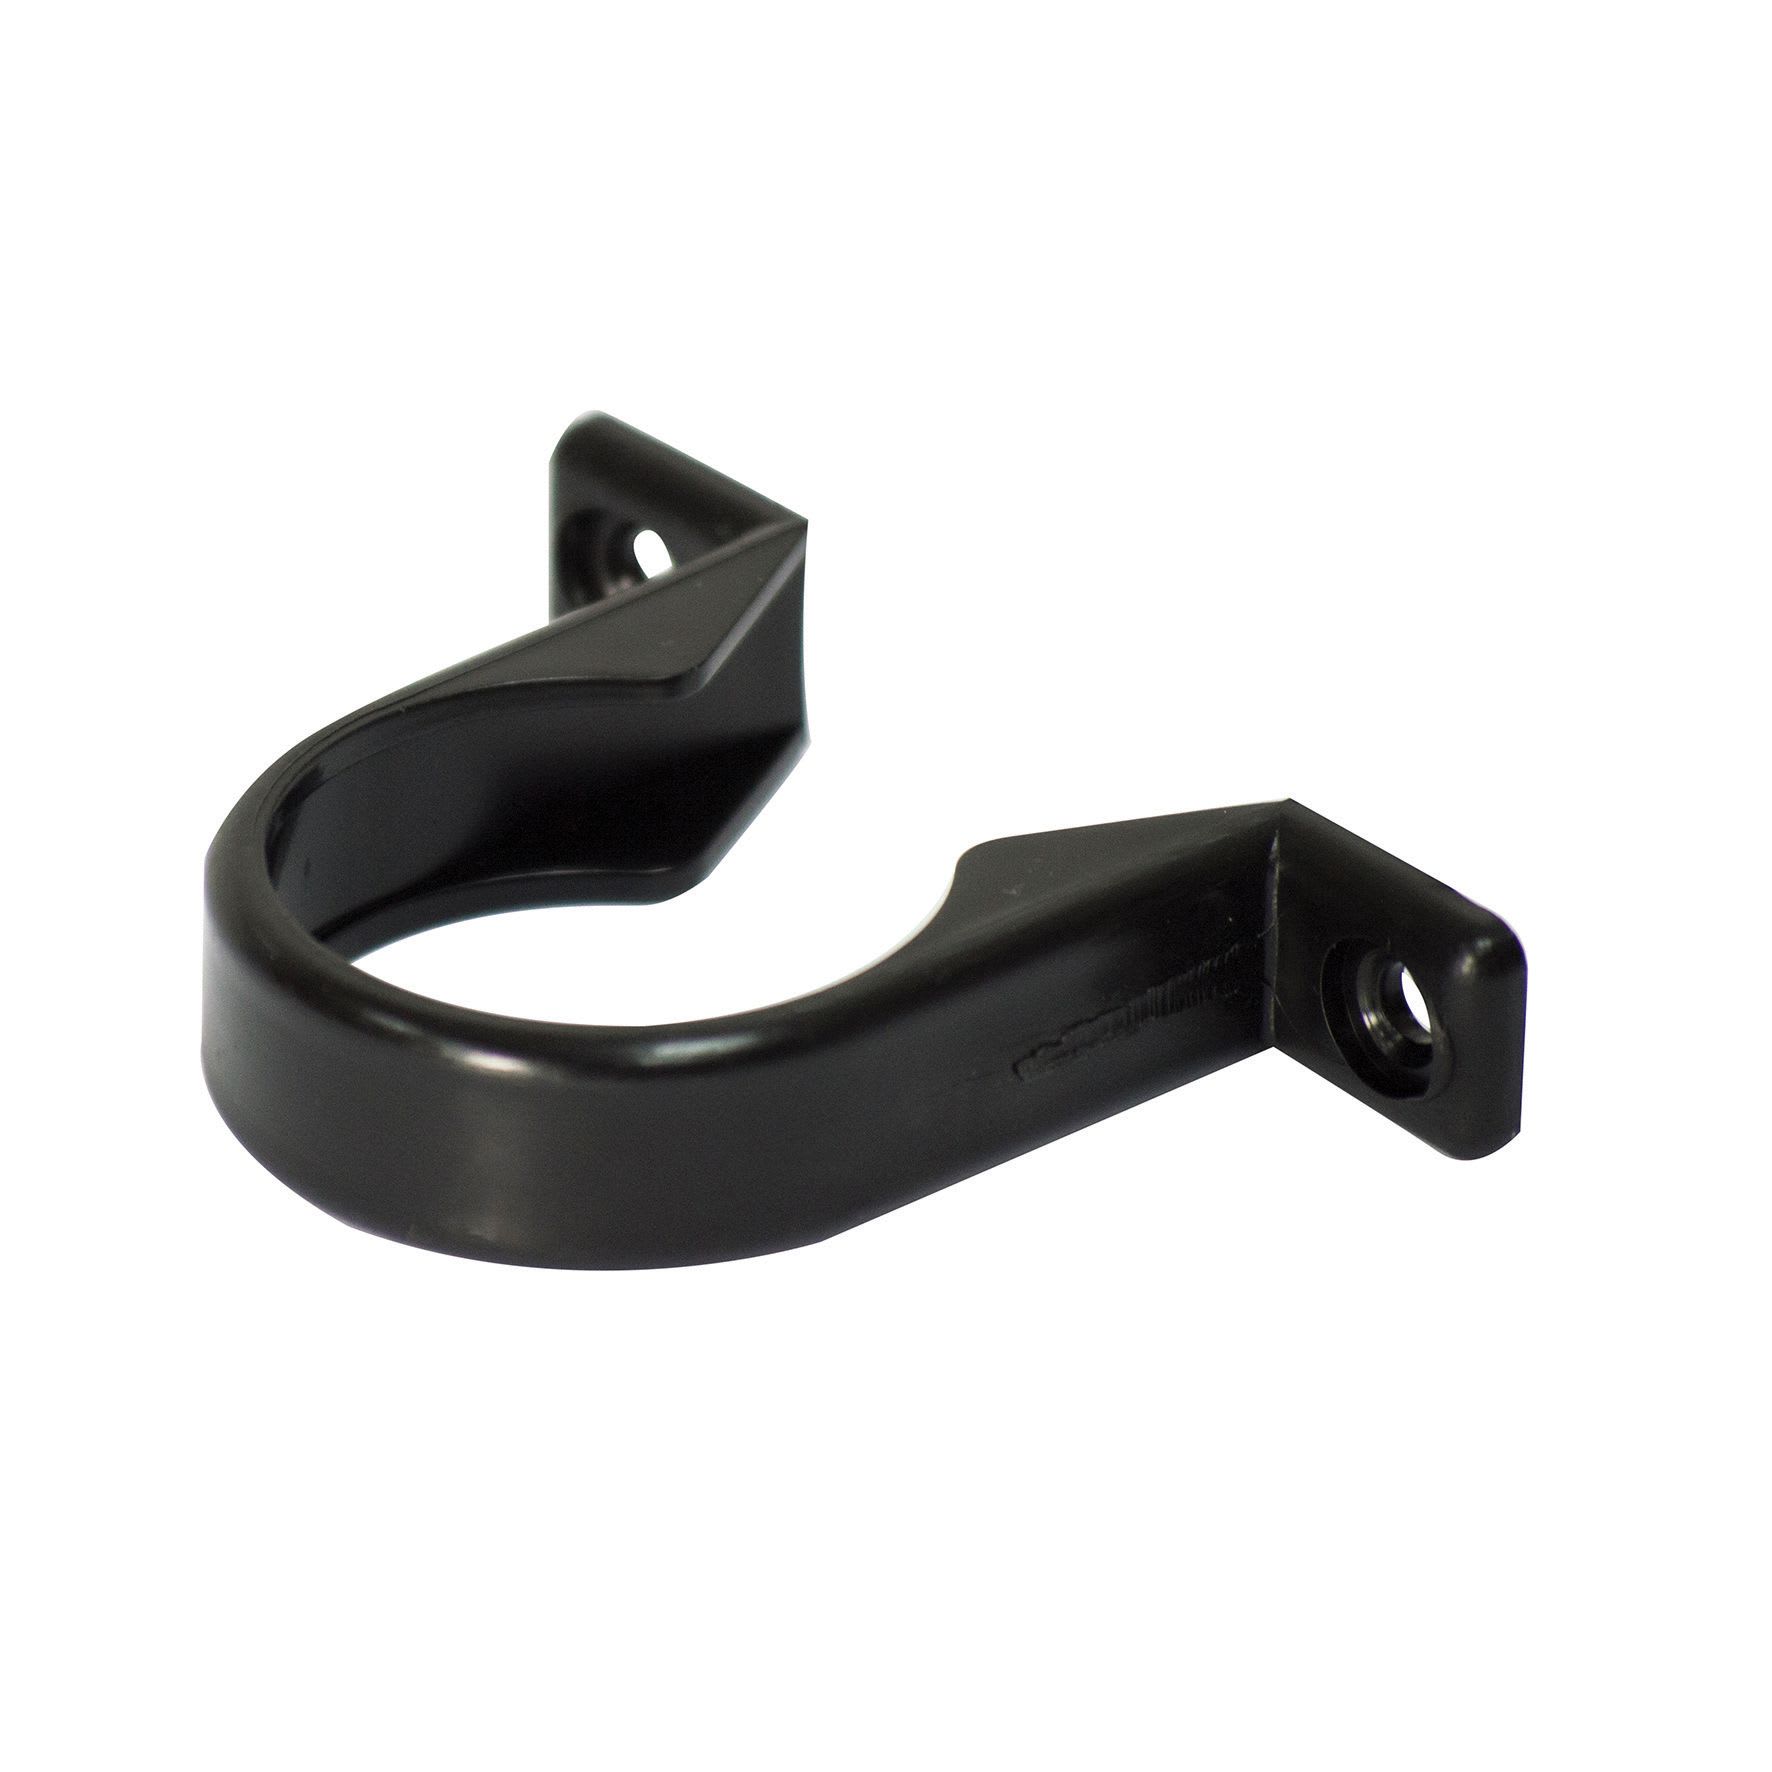 FloPlast WP34B Push-fit Waste Pipe Clips - Black